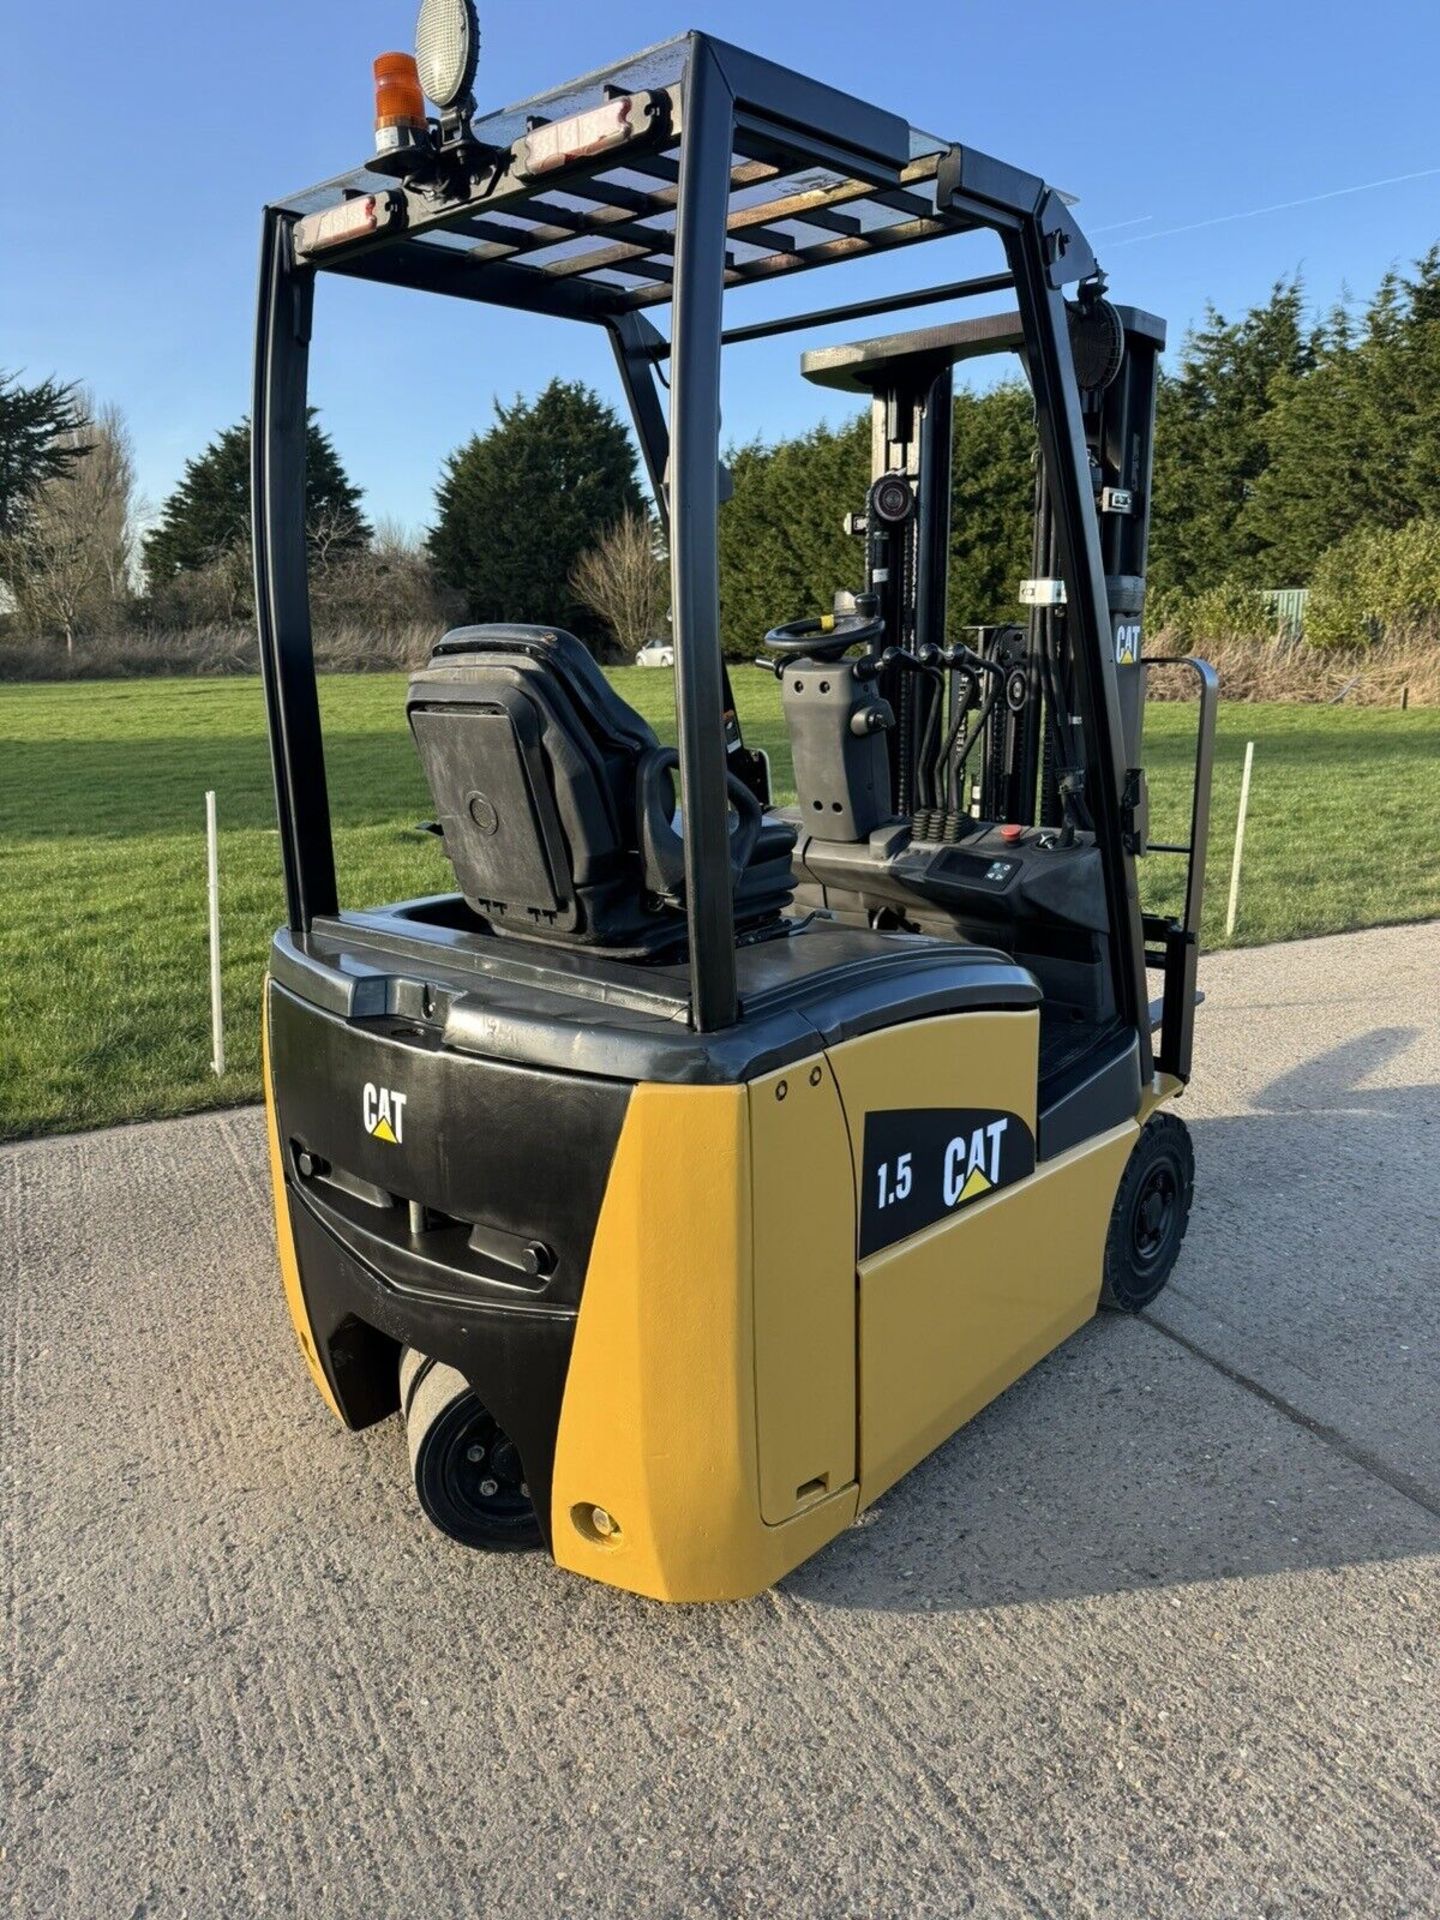 2017, CATERPILLAR - 1.5 Electric Forklift Truck (Container Spec) - Image 4 of 5